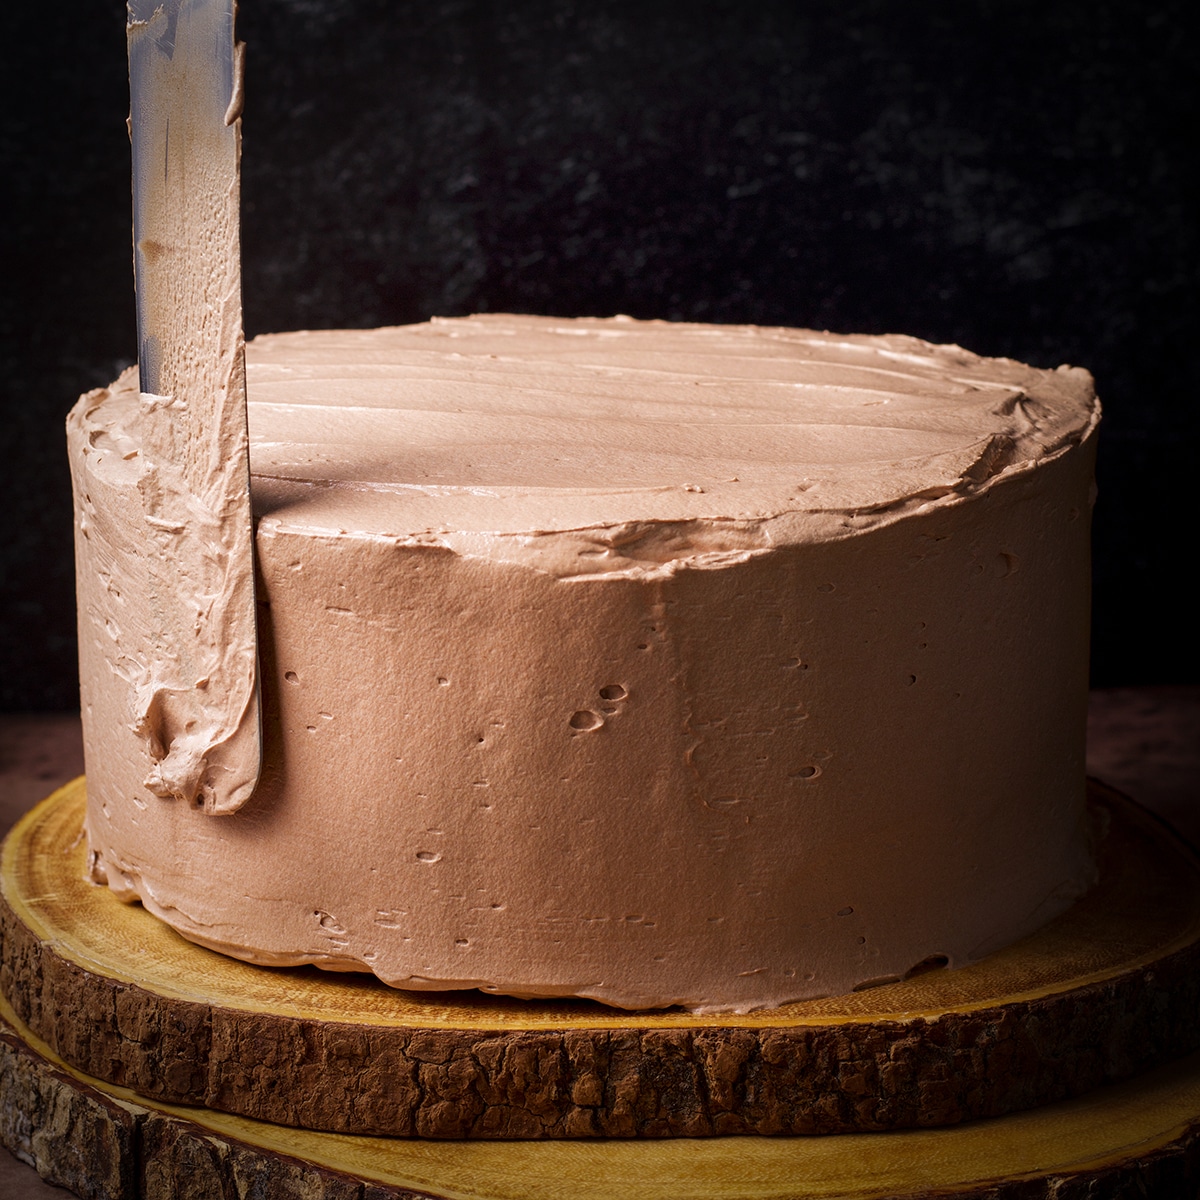 Someone using an icing spatula to smooth milk chocolate buttercream over the sides of a 2-layer chocolate truffle cake.